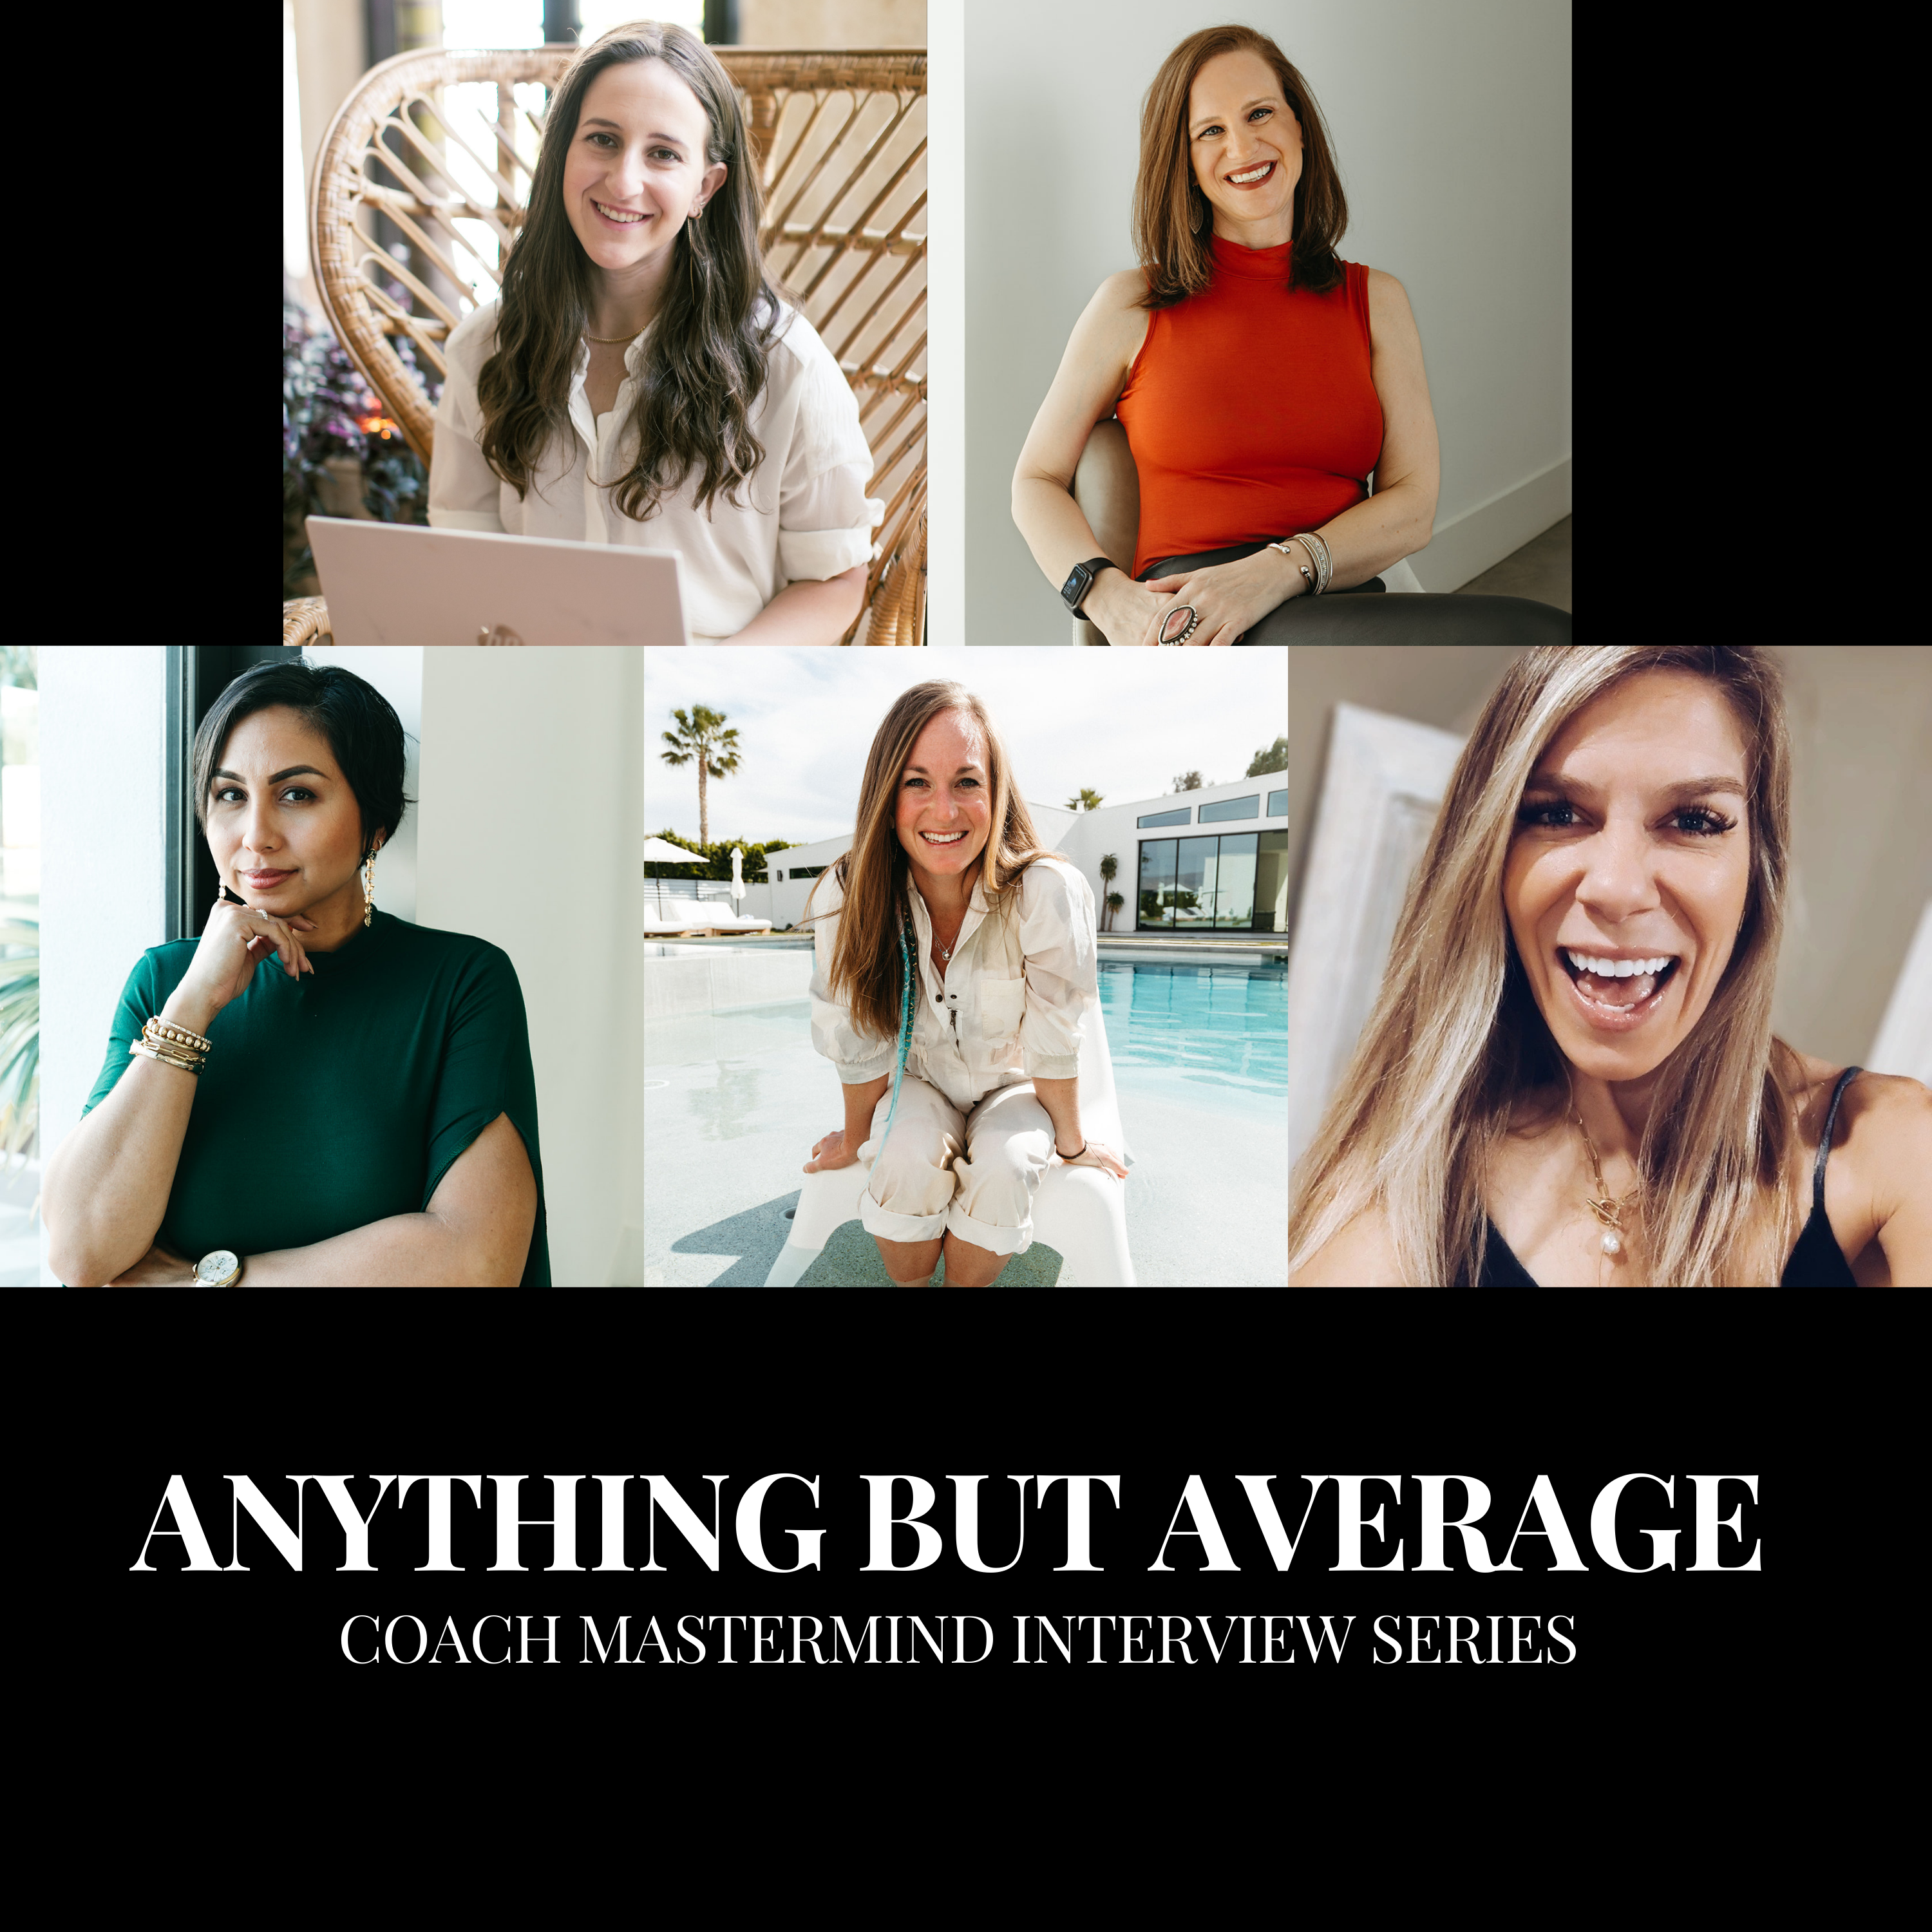 Anything but Average Coach Mastermind Interview Series: